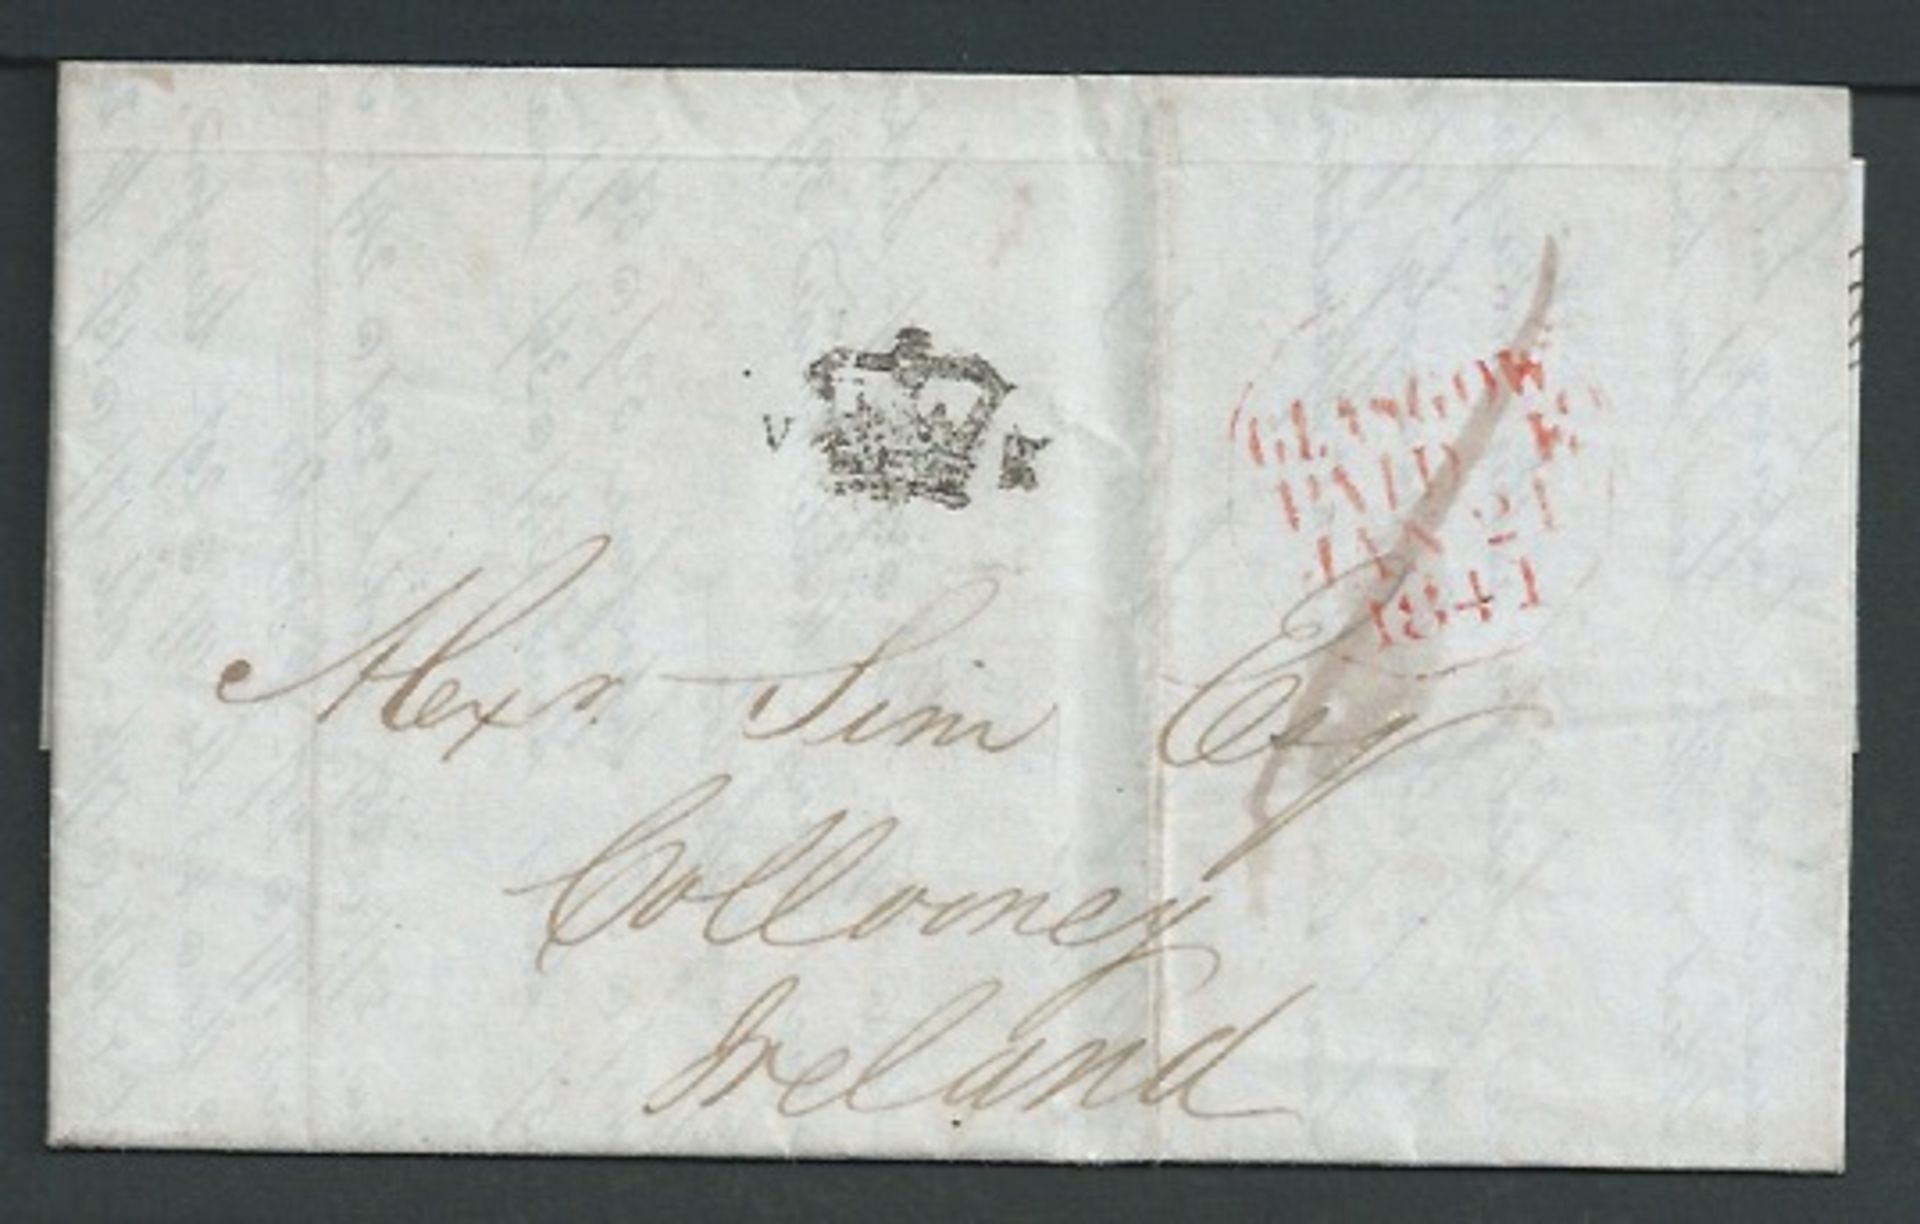 G.B. - Scotland 1841 Entire Letter from Glasgow prepaid 1d to Collooney with a fine strike of the s